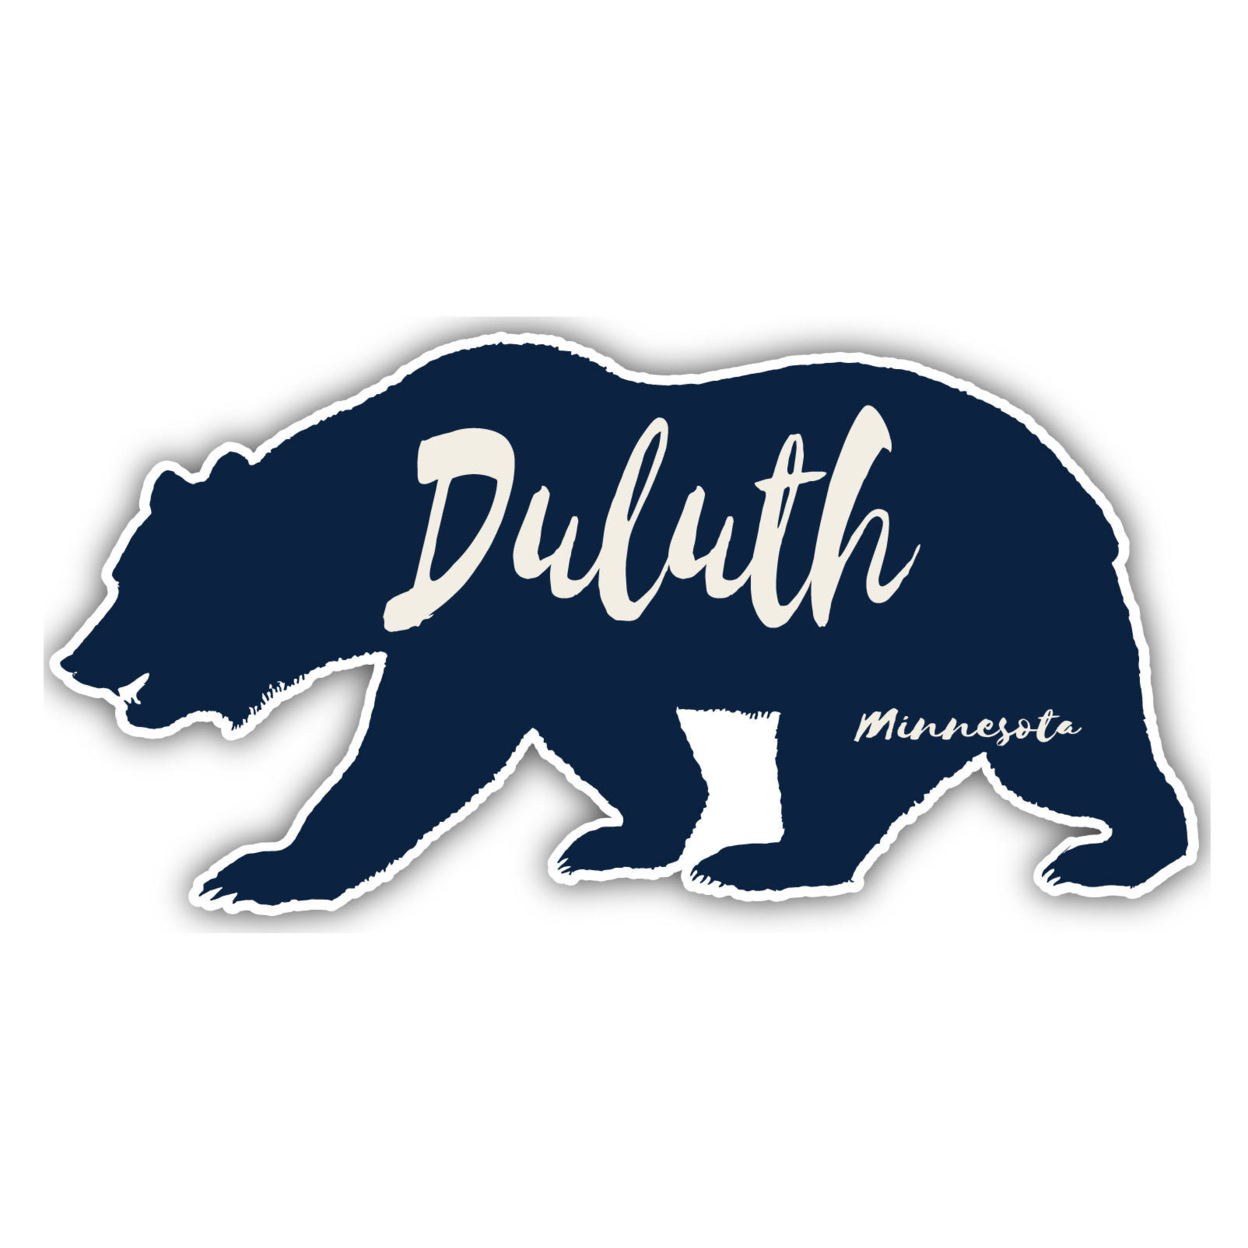 Duluth Minnesota Souvenir Decorative Stickers (Choose Theme And Size) - 4-Pack, 10-Inch, Bear